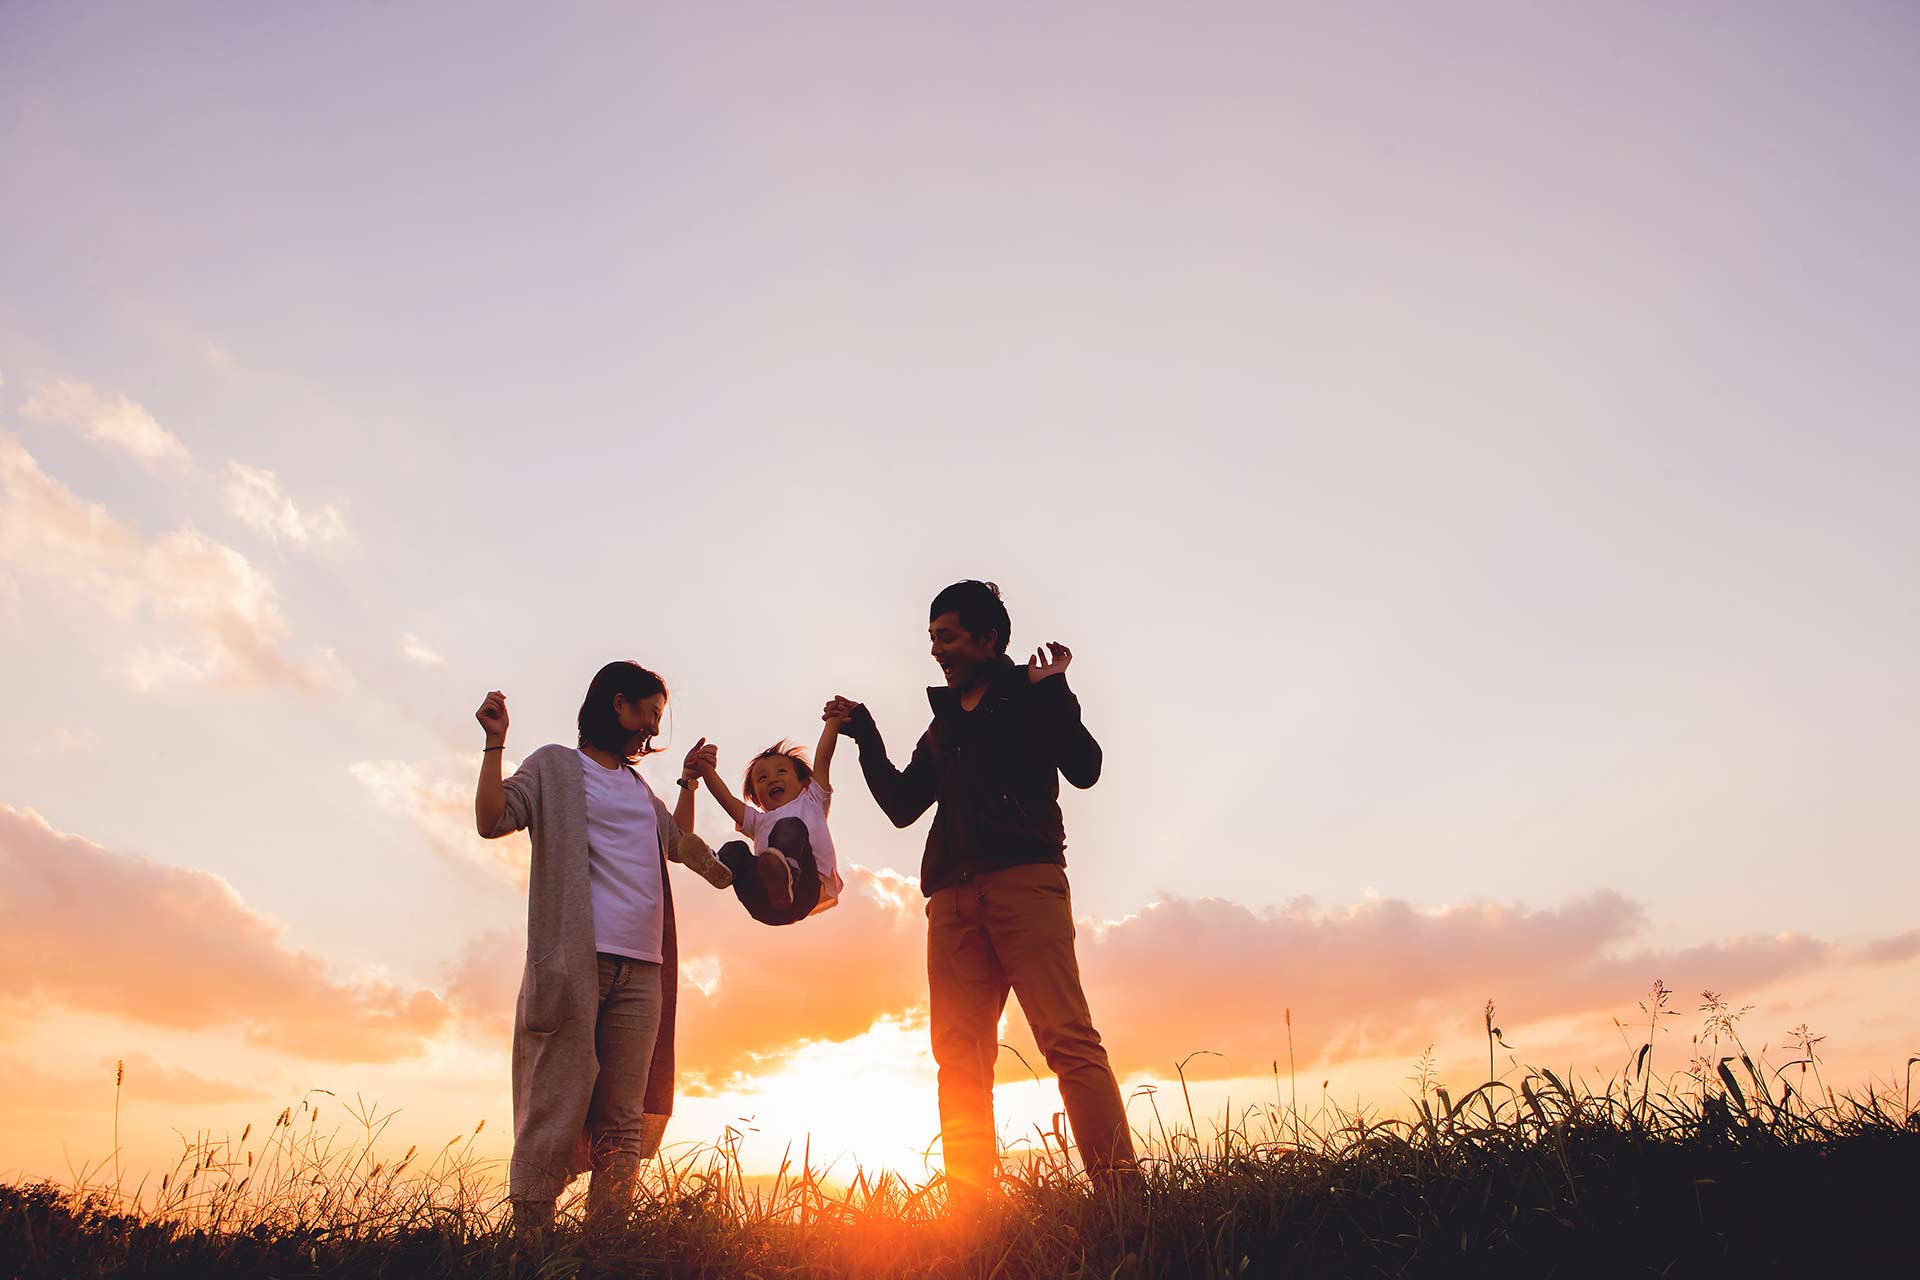 , image shows family swinging a child with a sunset in the backgroun